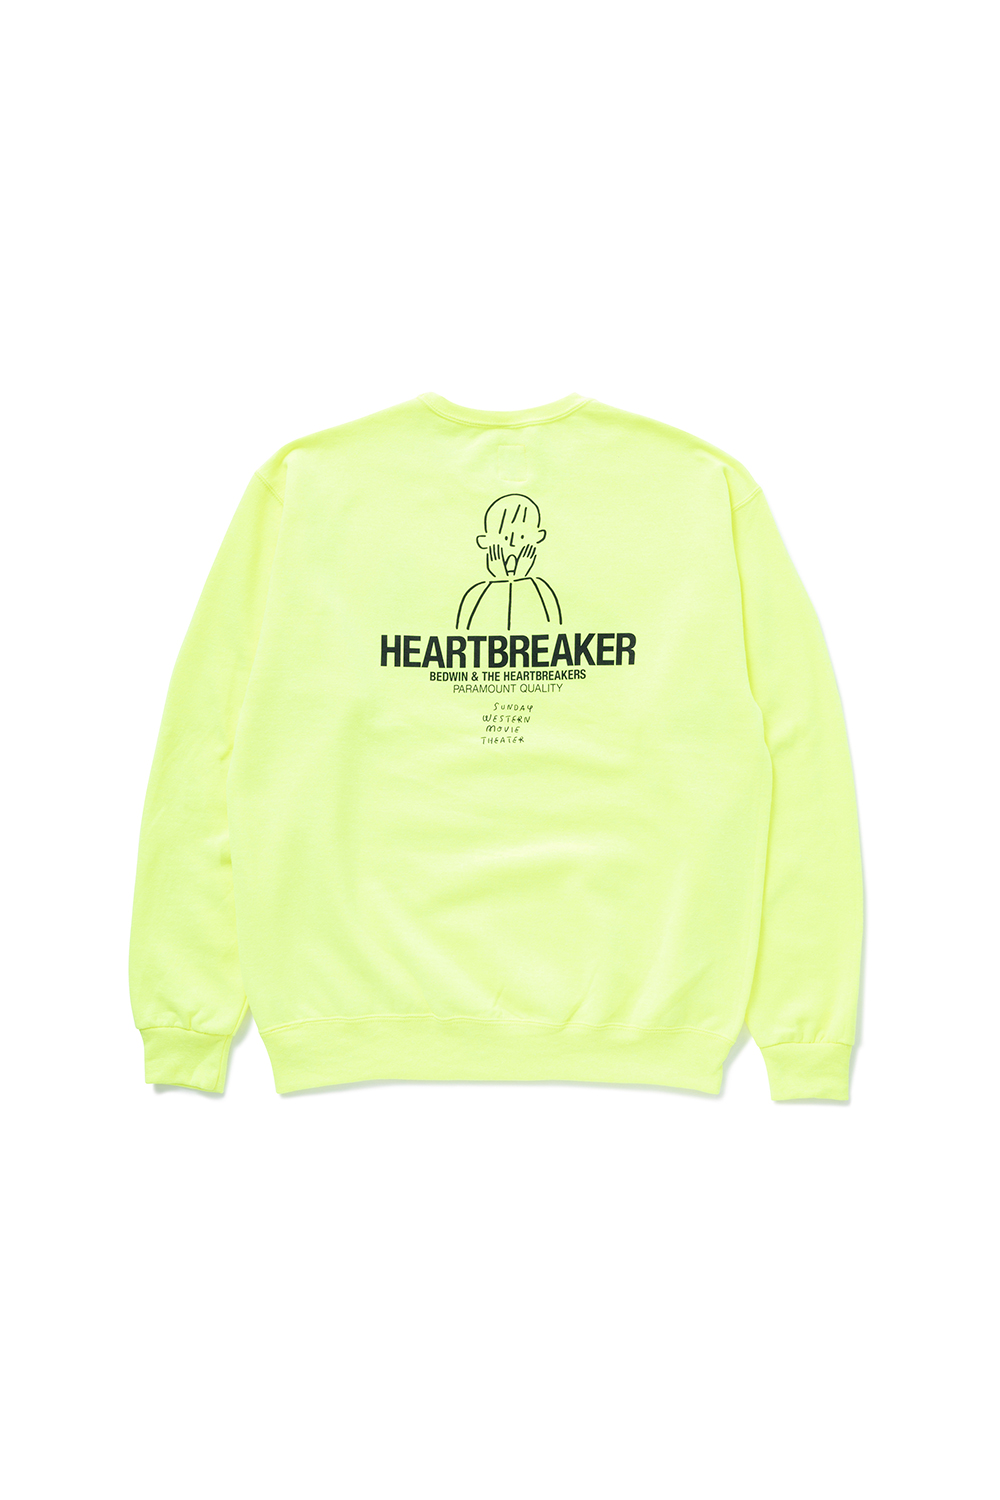 BEDWIN\u0026THE HEARTBREAKERSと長場雄とのコラボコレクション